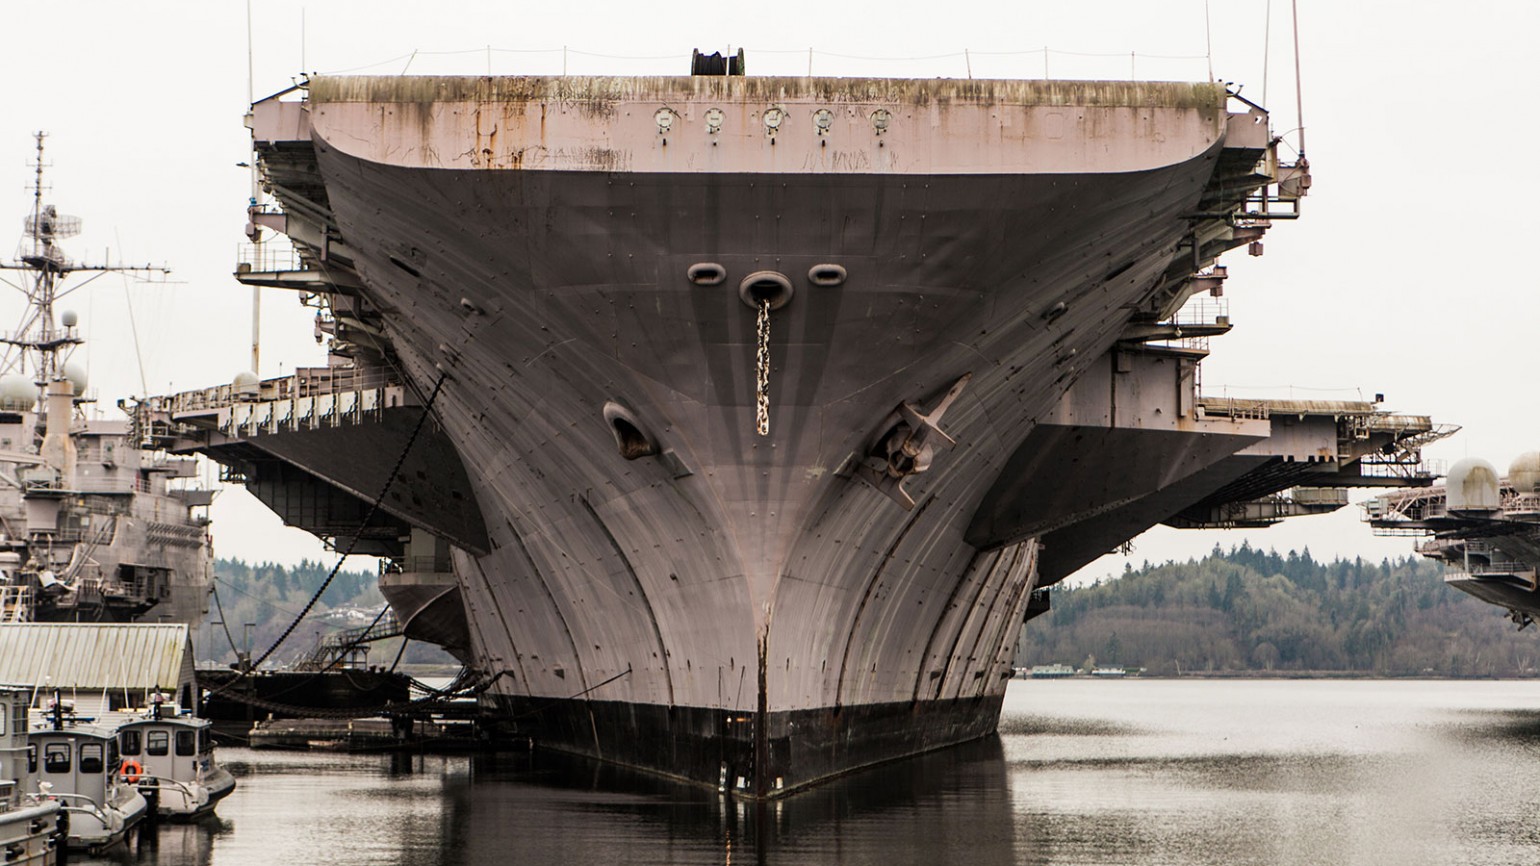 The aircraft carrier Constellation spent most of its life operating out of San Diego. Photo courtesy of Cody Long.